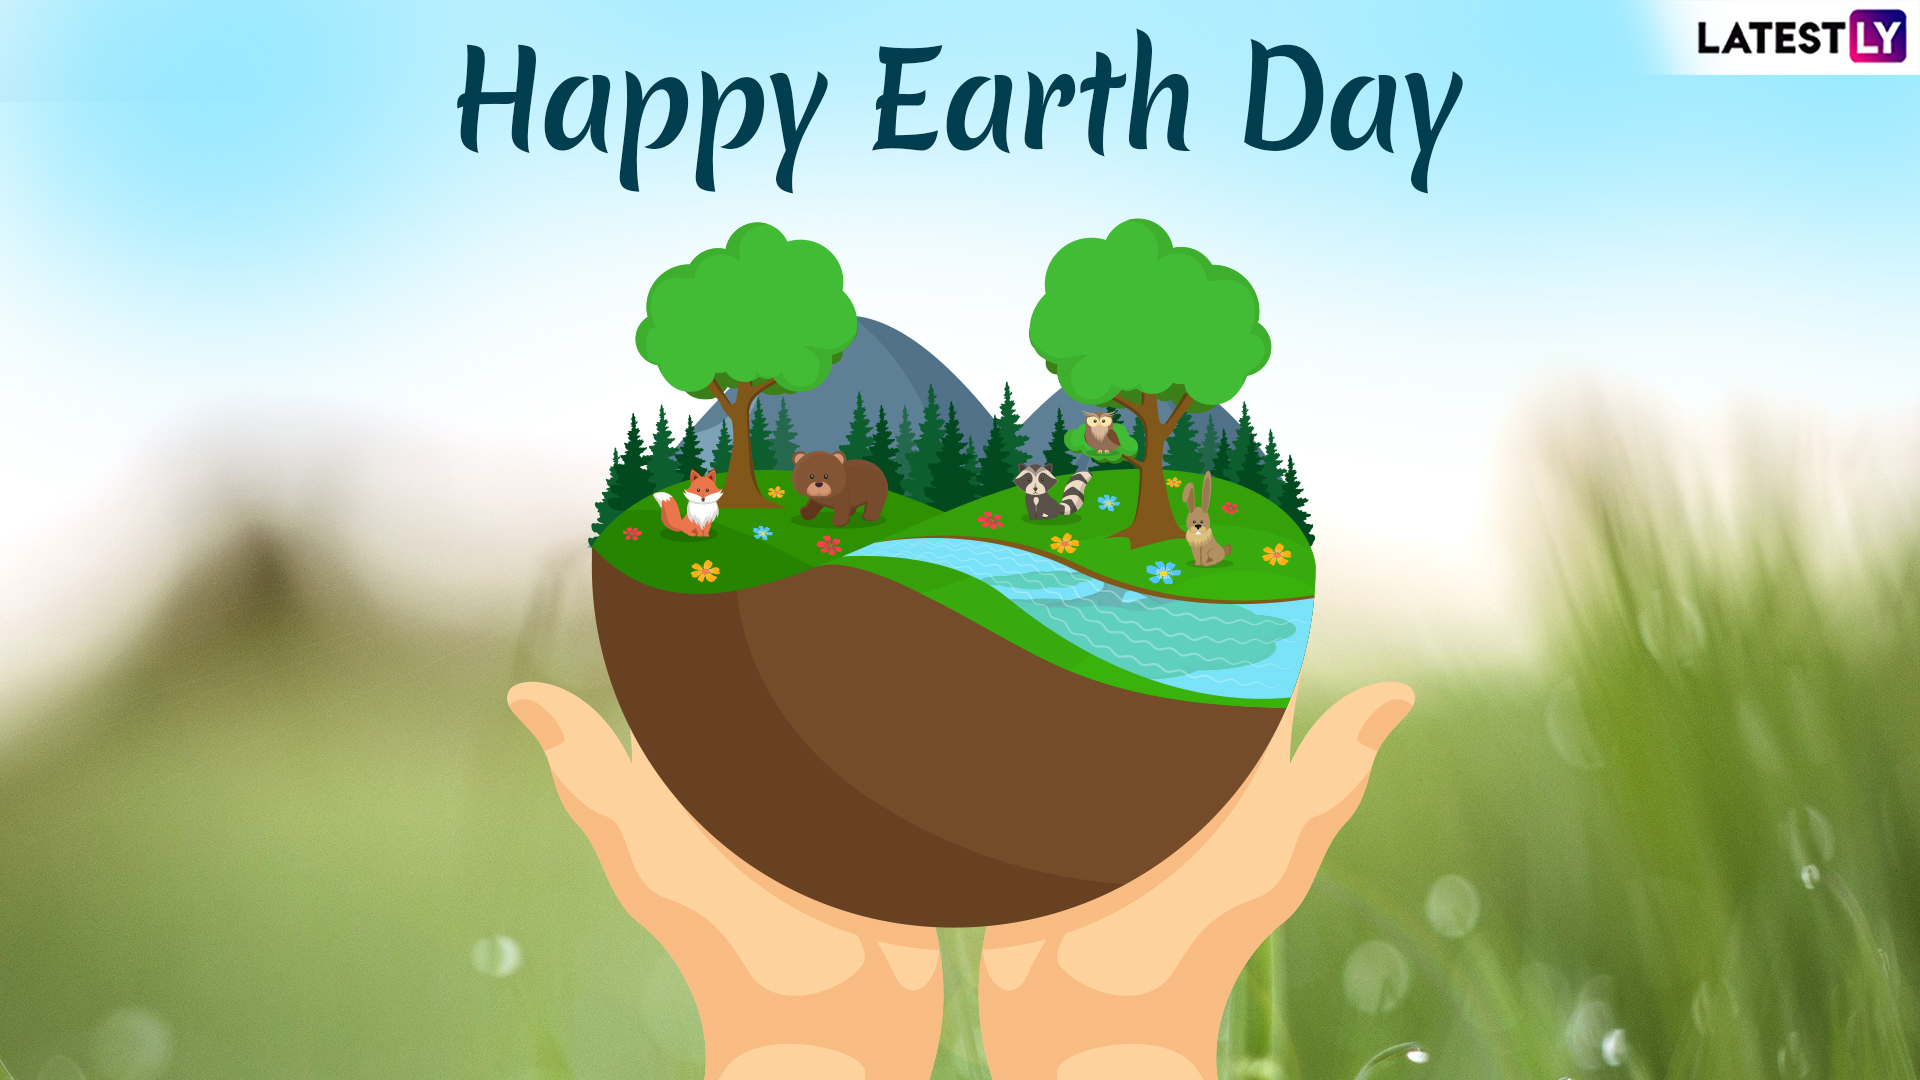 Earth Day 2019 Images & HD Wallpapers for Free Download ...